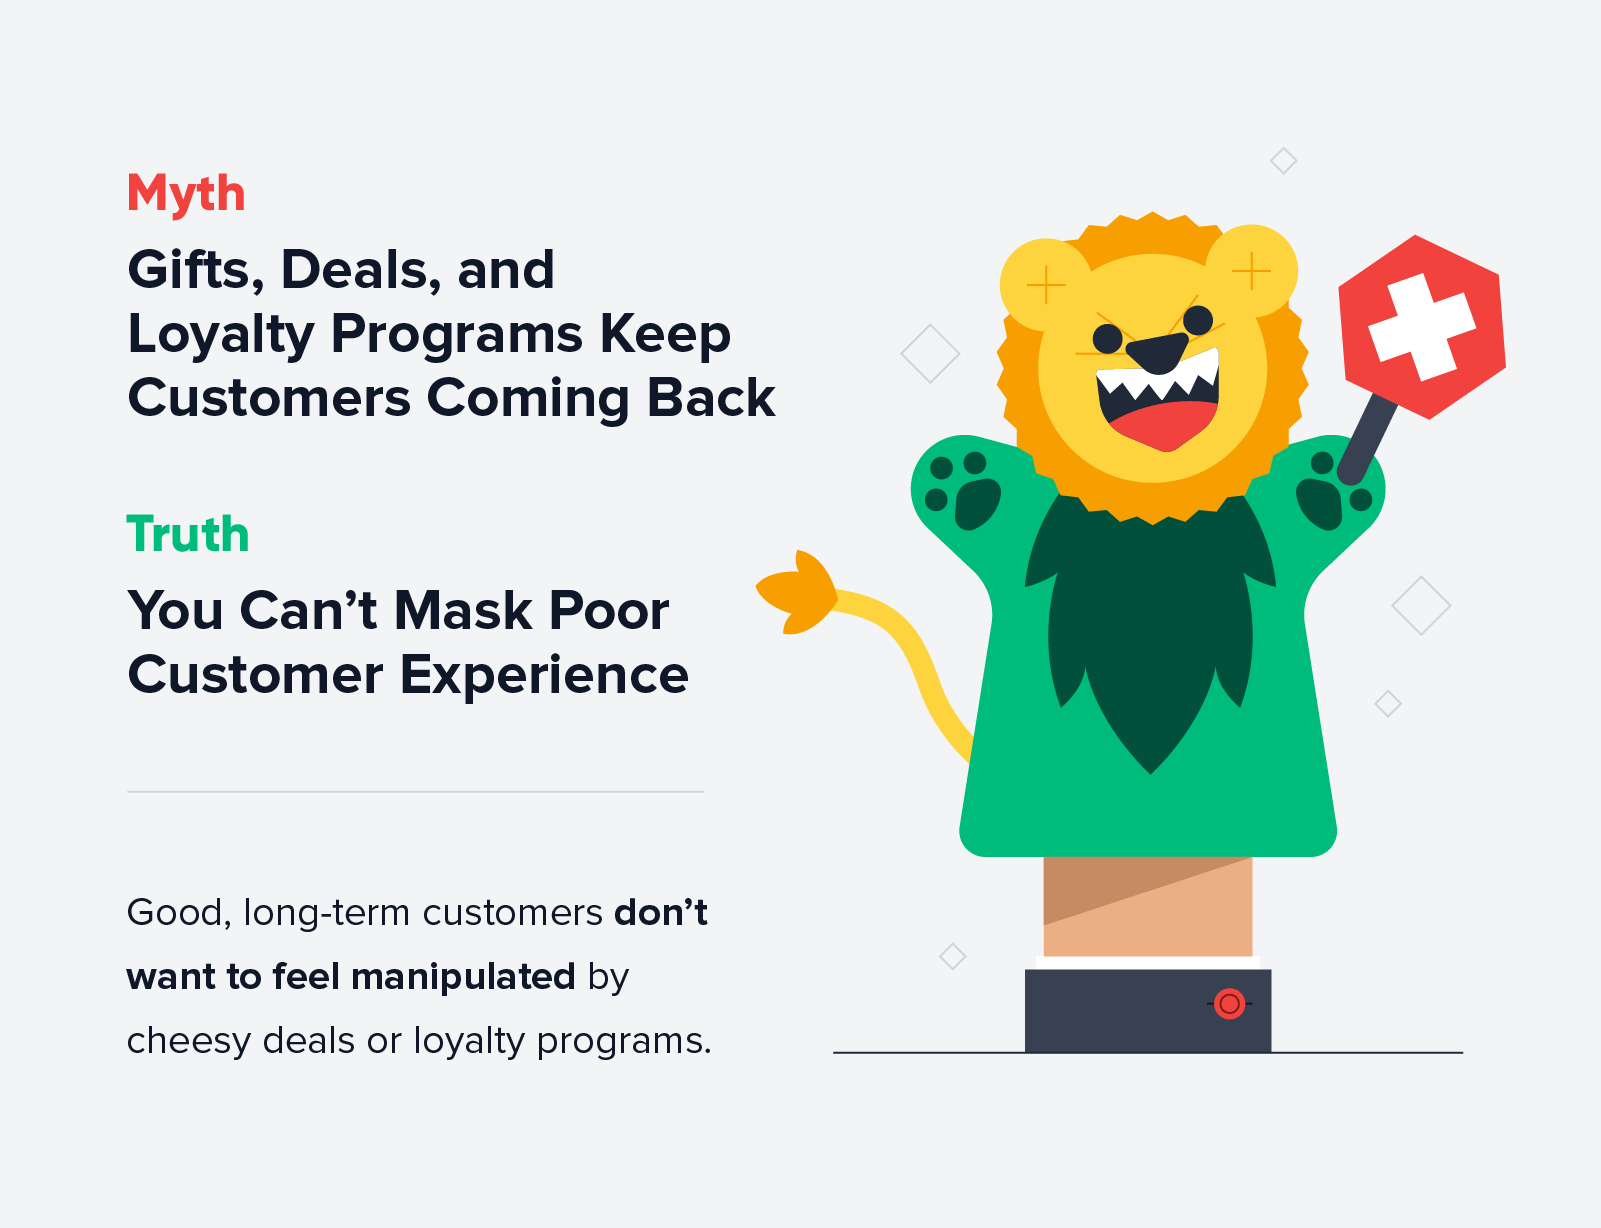 You can't mask poor customer experience